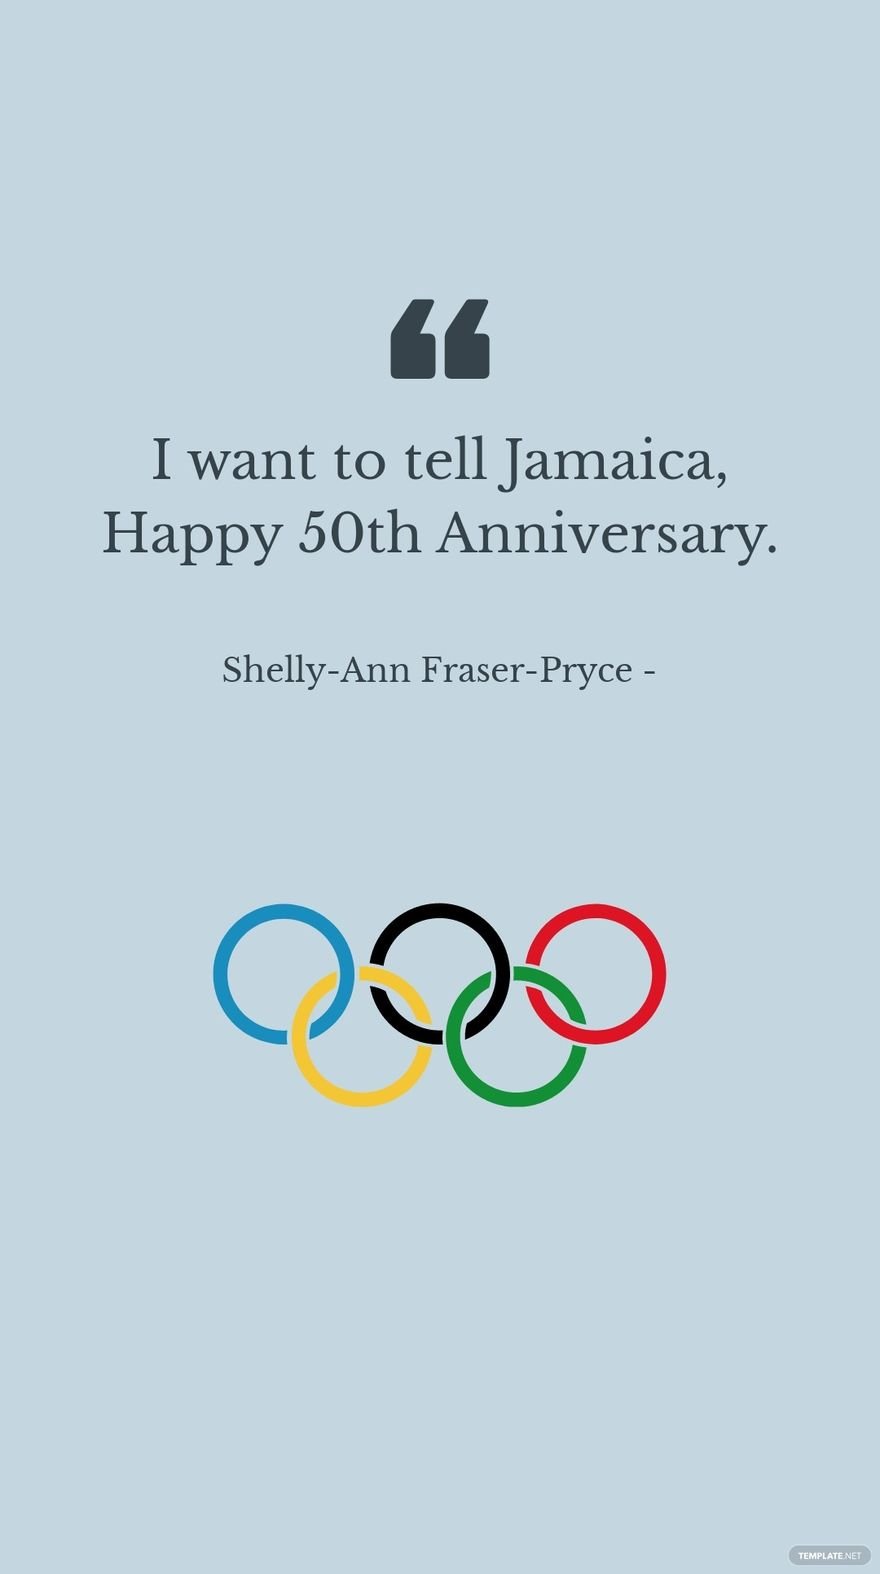 Free Shelly-Ann Fraser-Pryce - I want to tell Jamaica, Happy 50th Anniversary. in JPG